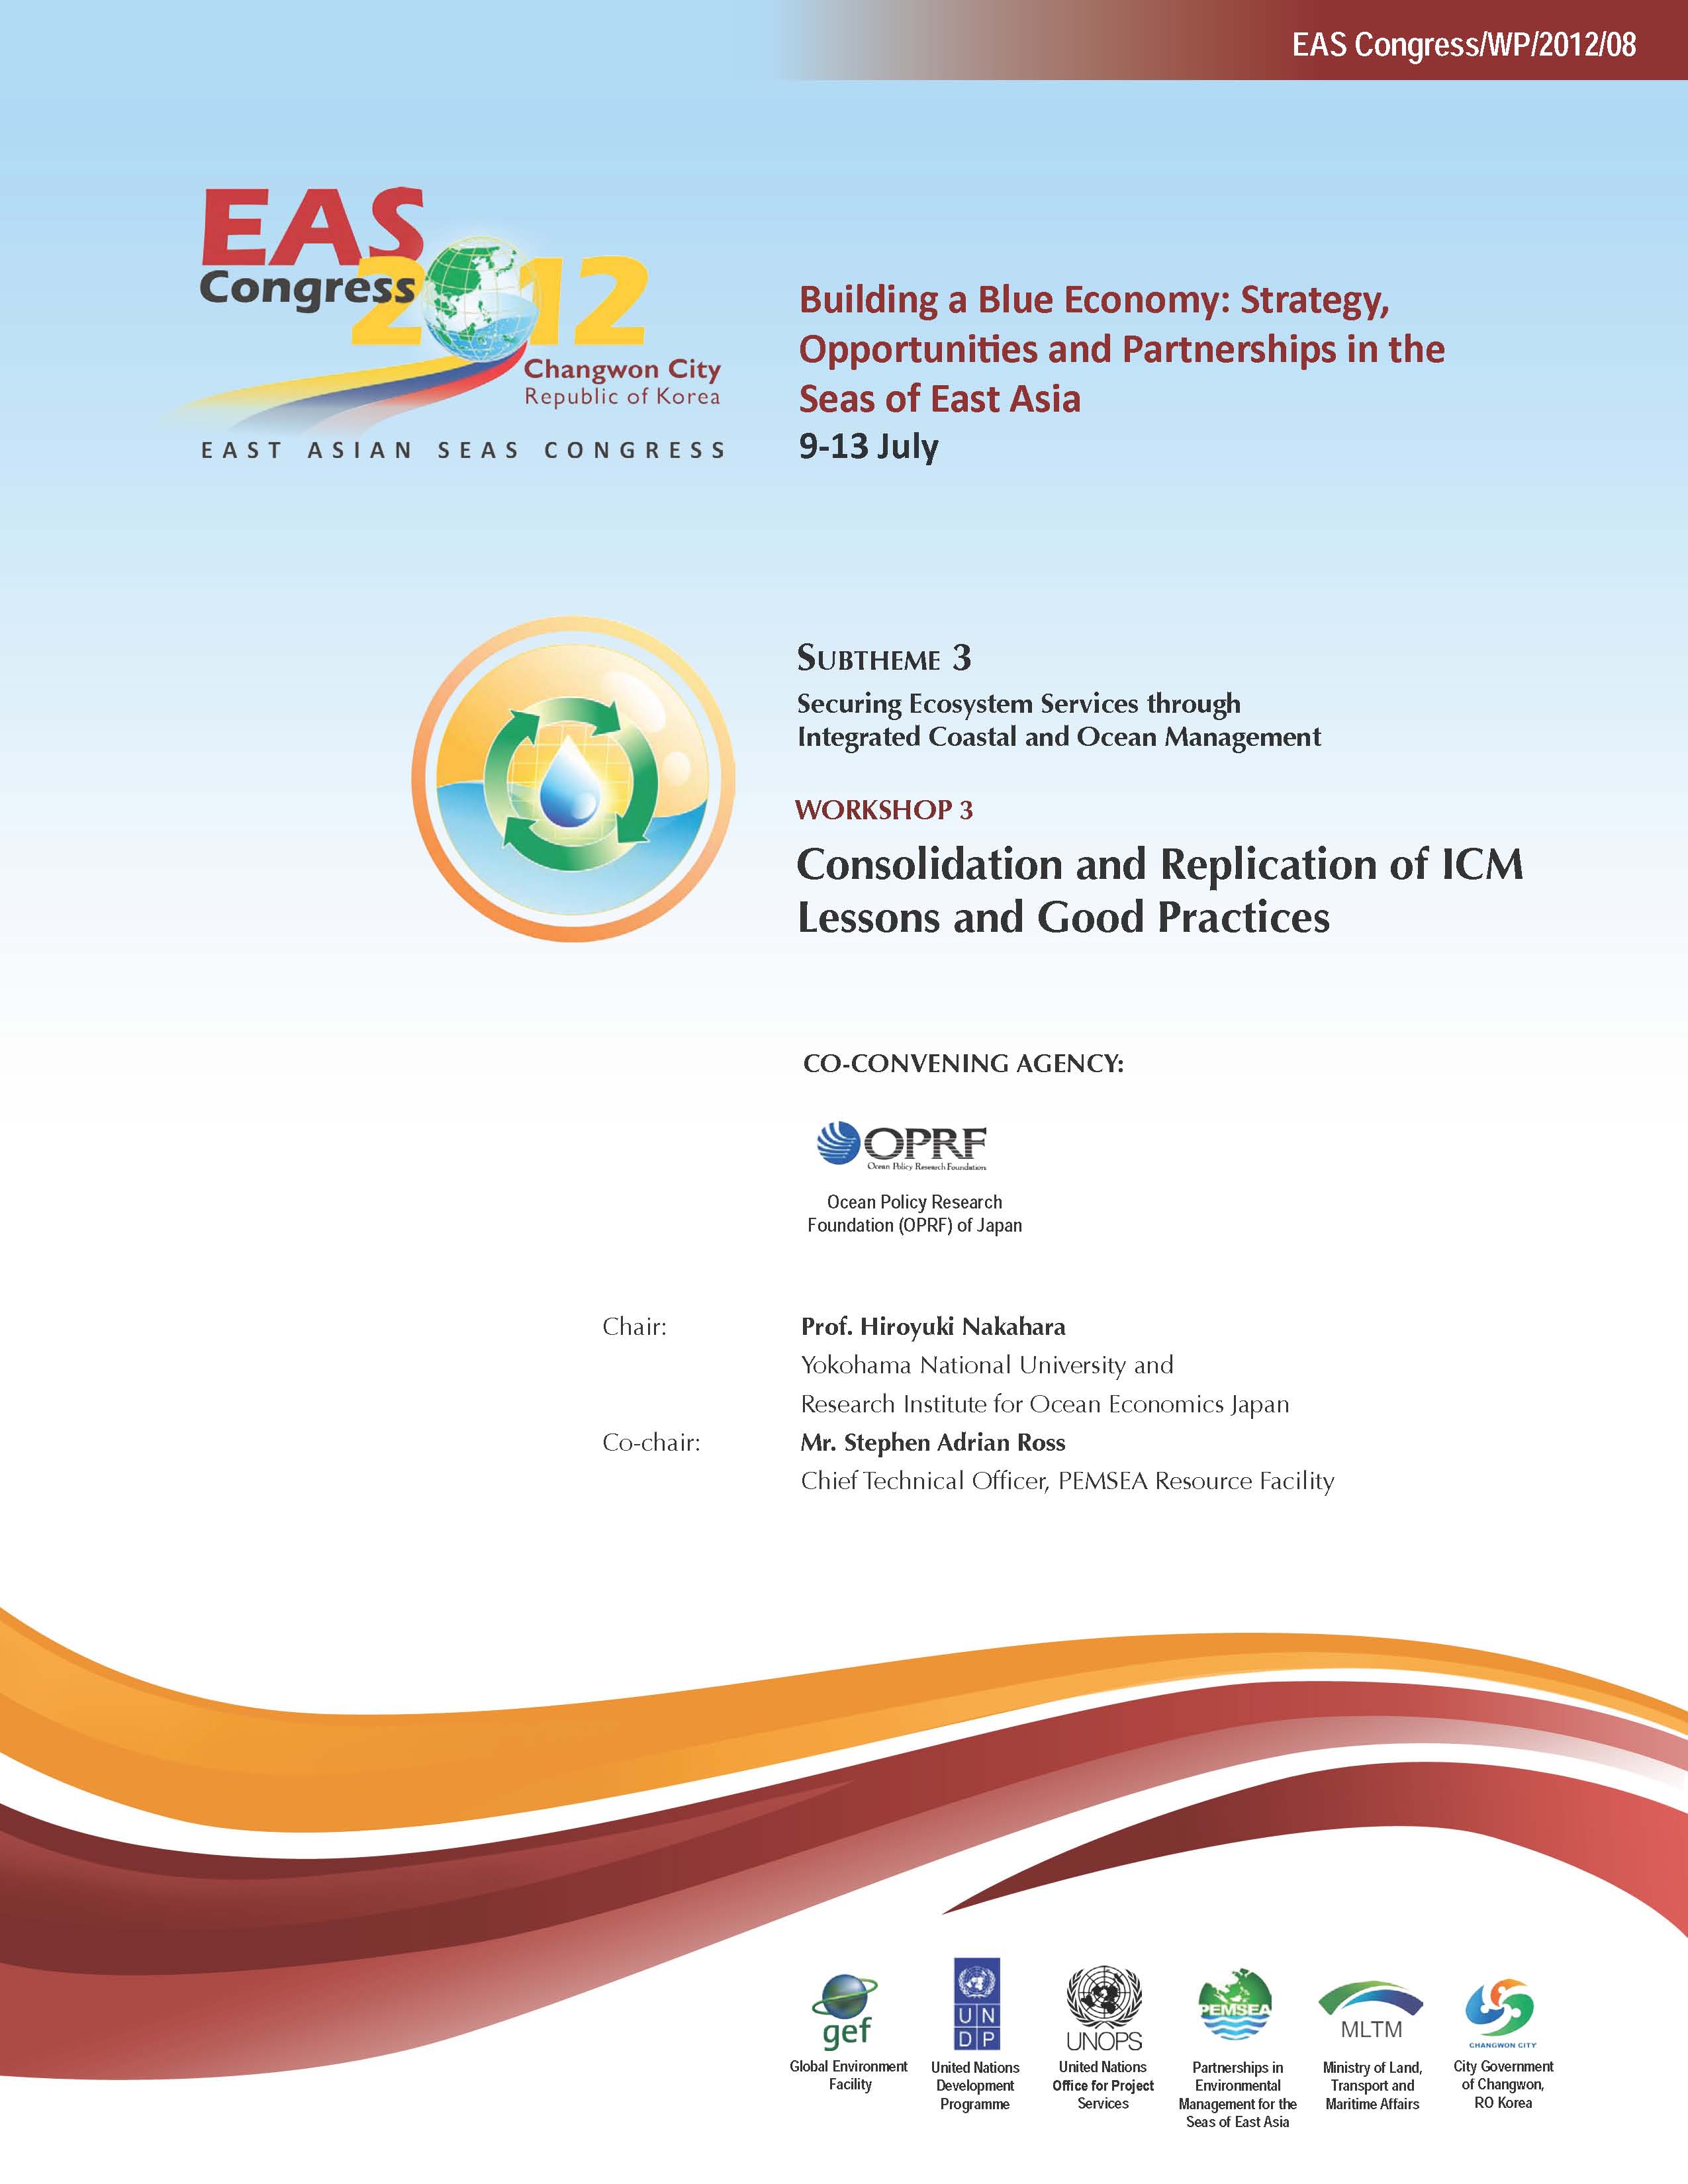 Proceedings of the Workshop on Consolidation and Replication of ICM Lessons and Good Practices